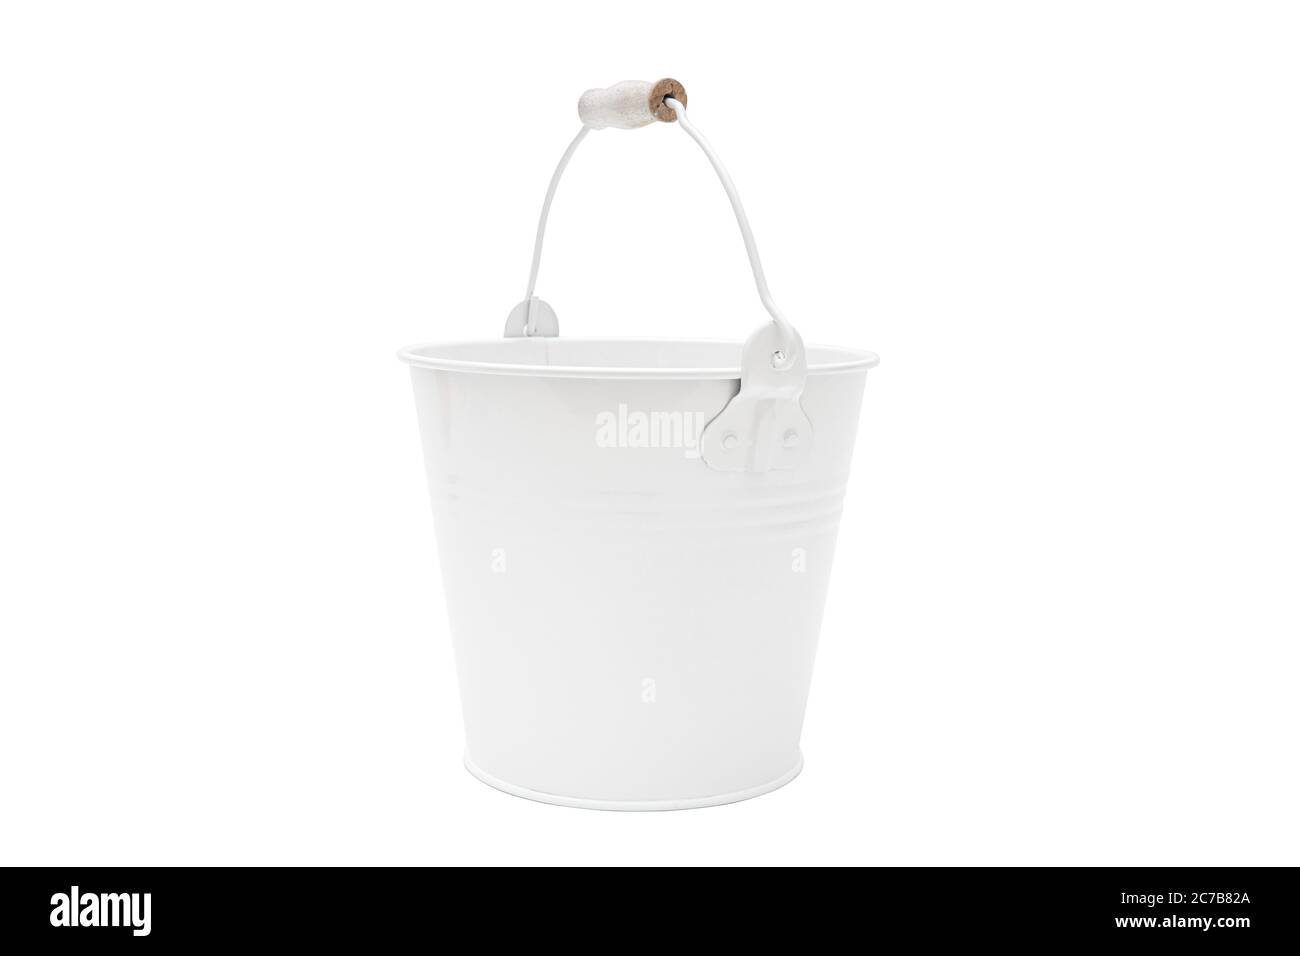 Classic white metal bucket with wood handle isolated on white background. Stock Photo